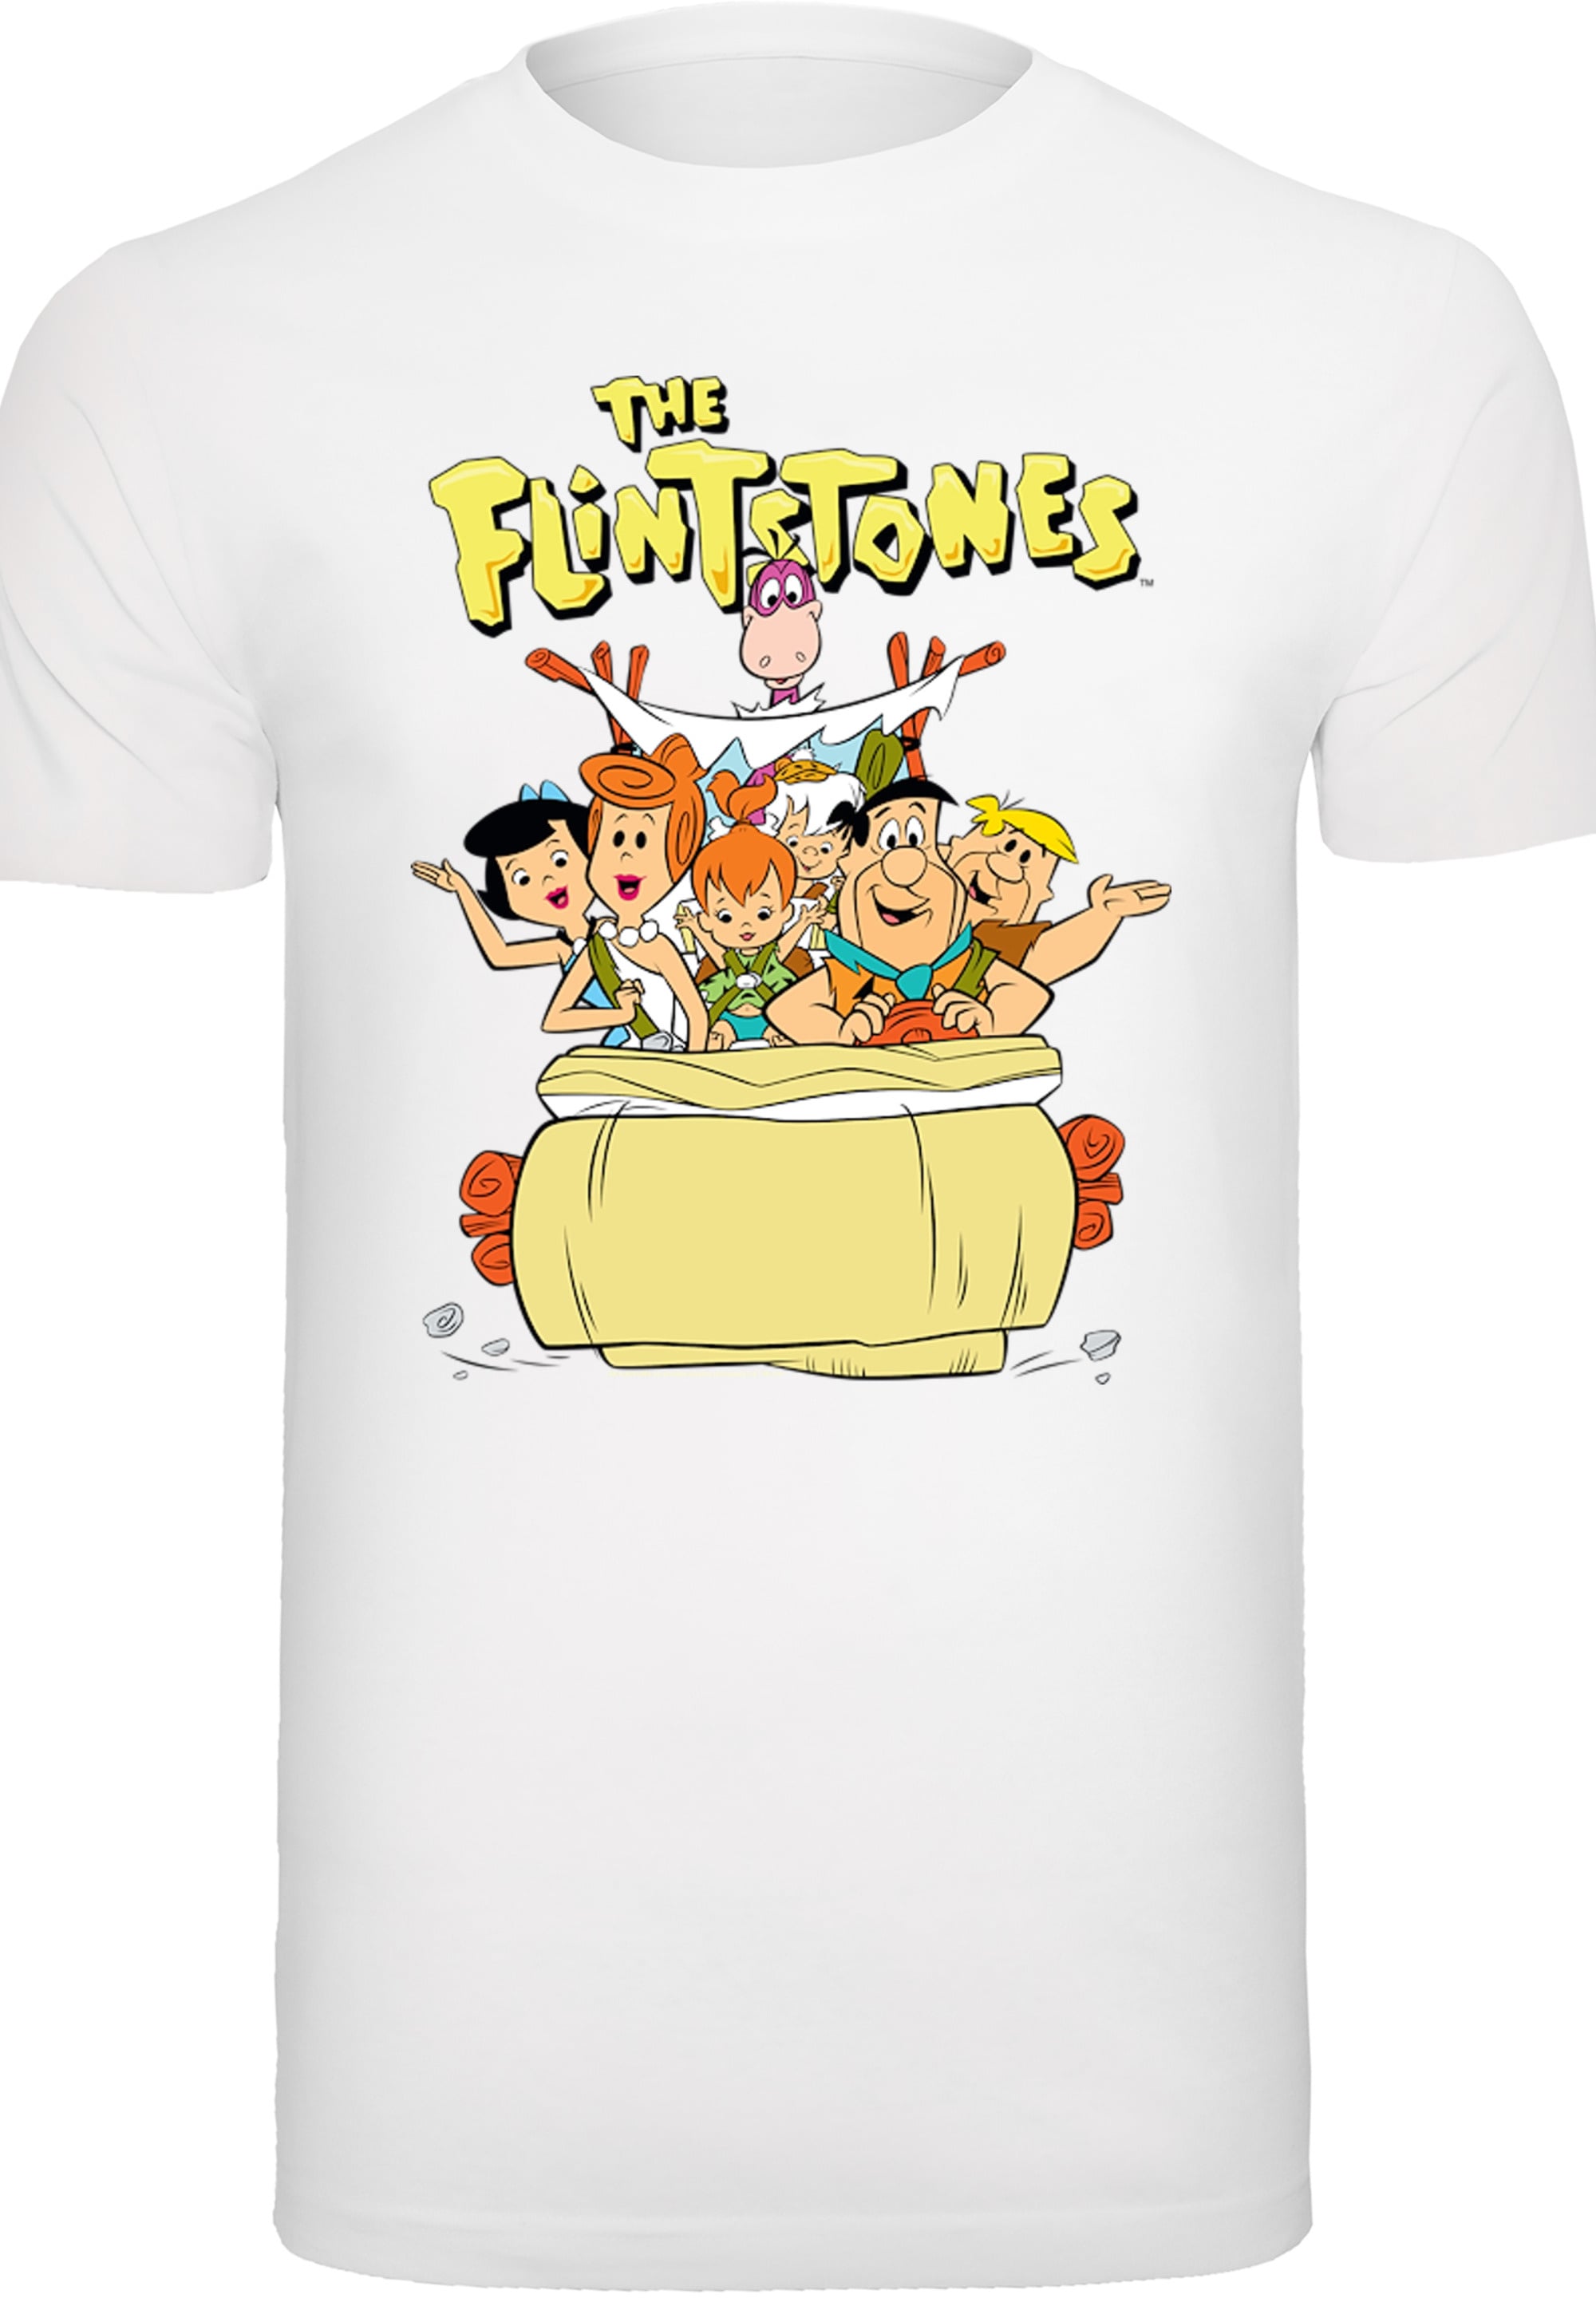 F4NT4STIC T-Shirt »Die Familie Feuerstein The The Ride«, Print